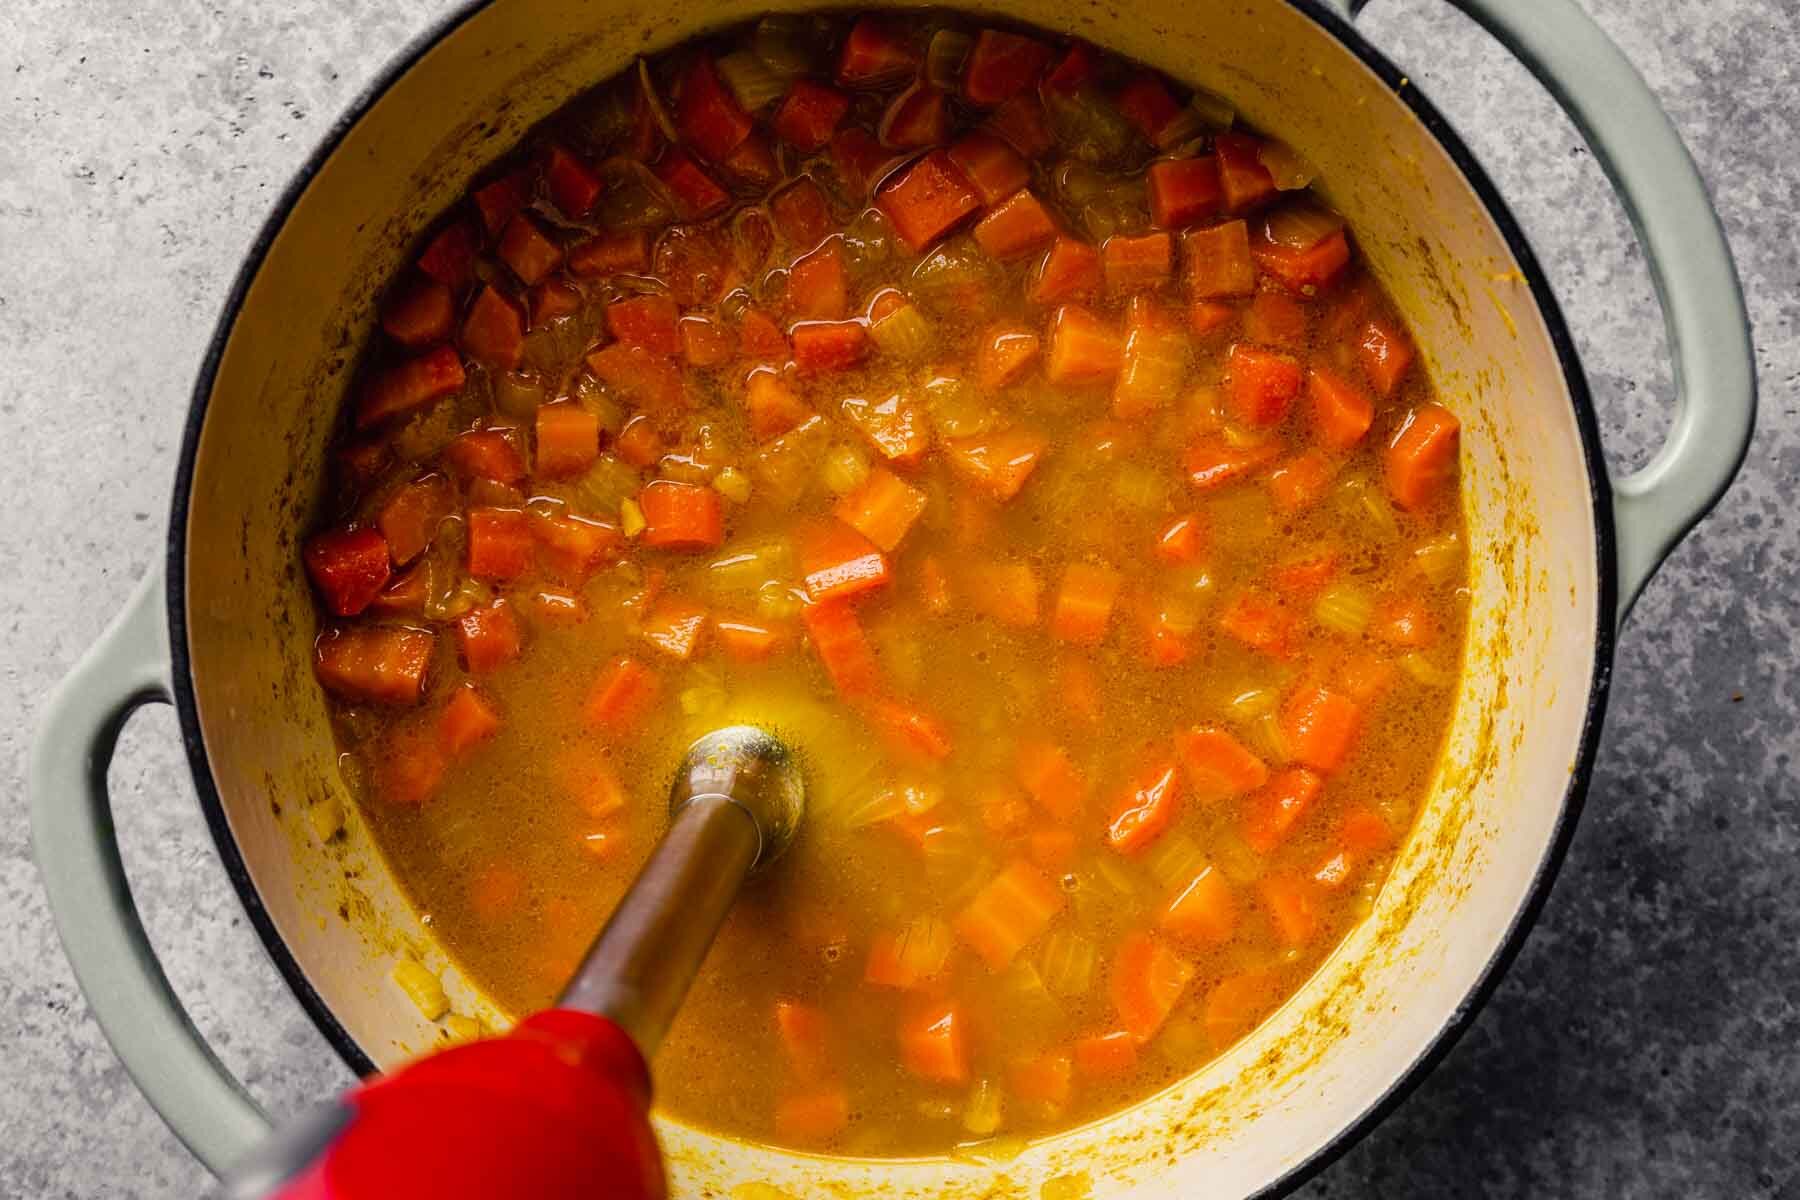 immersion blender blending curried carrot soup in a large dutch oven